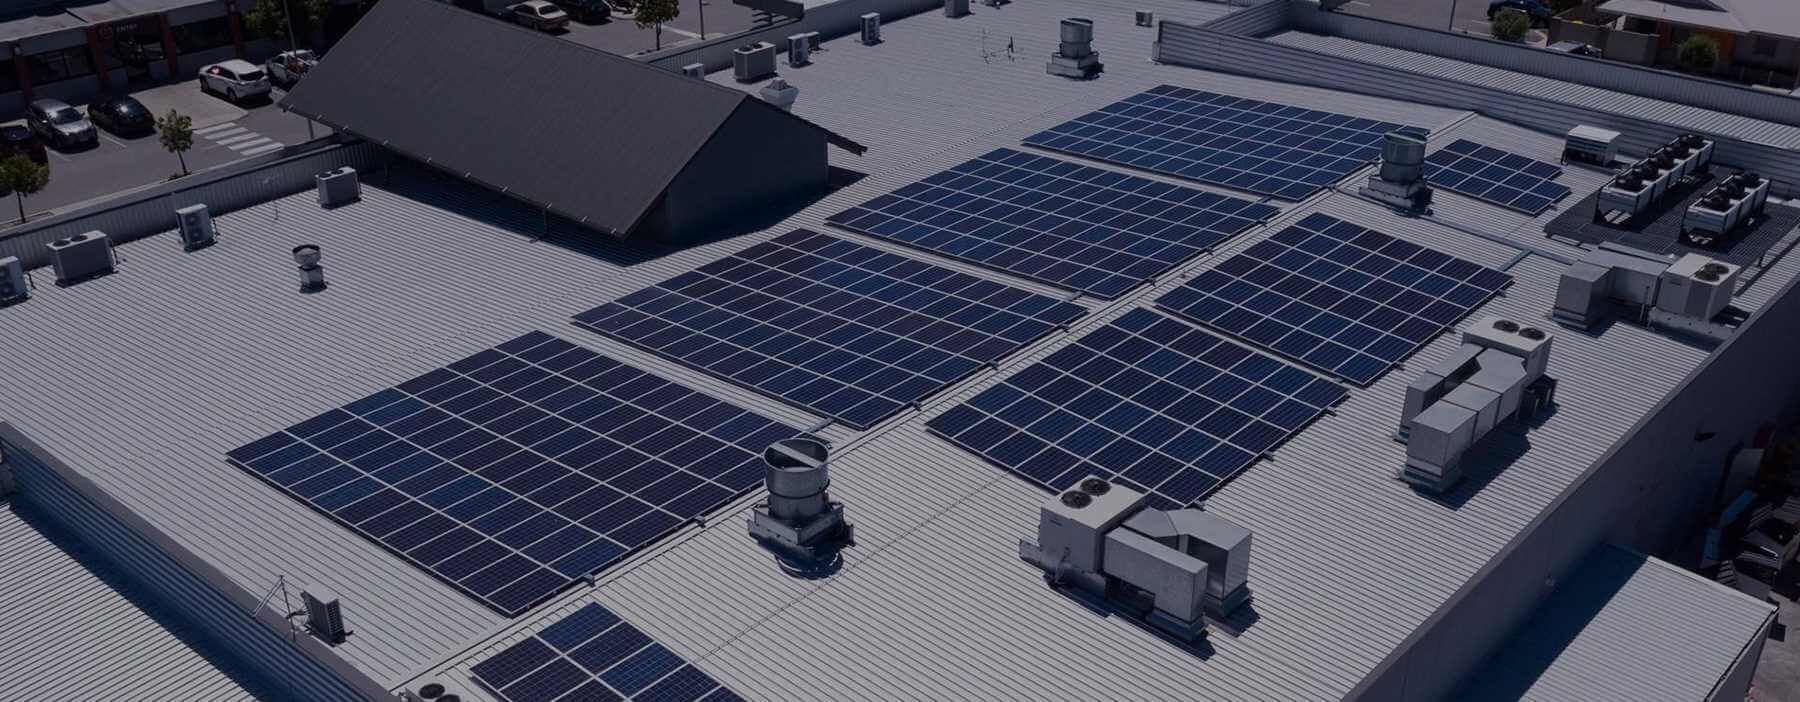  How Can Solar Panel Installation Benefit Businesses?